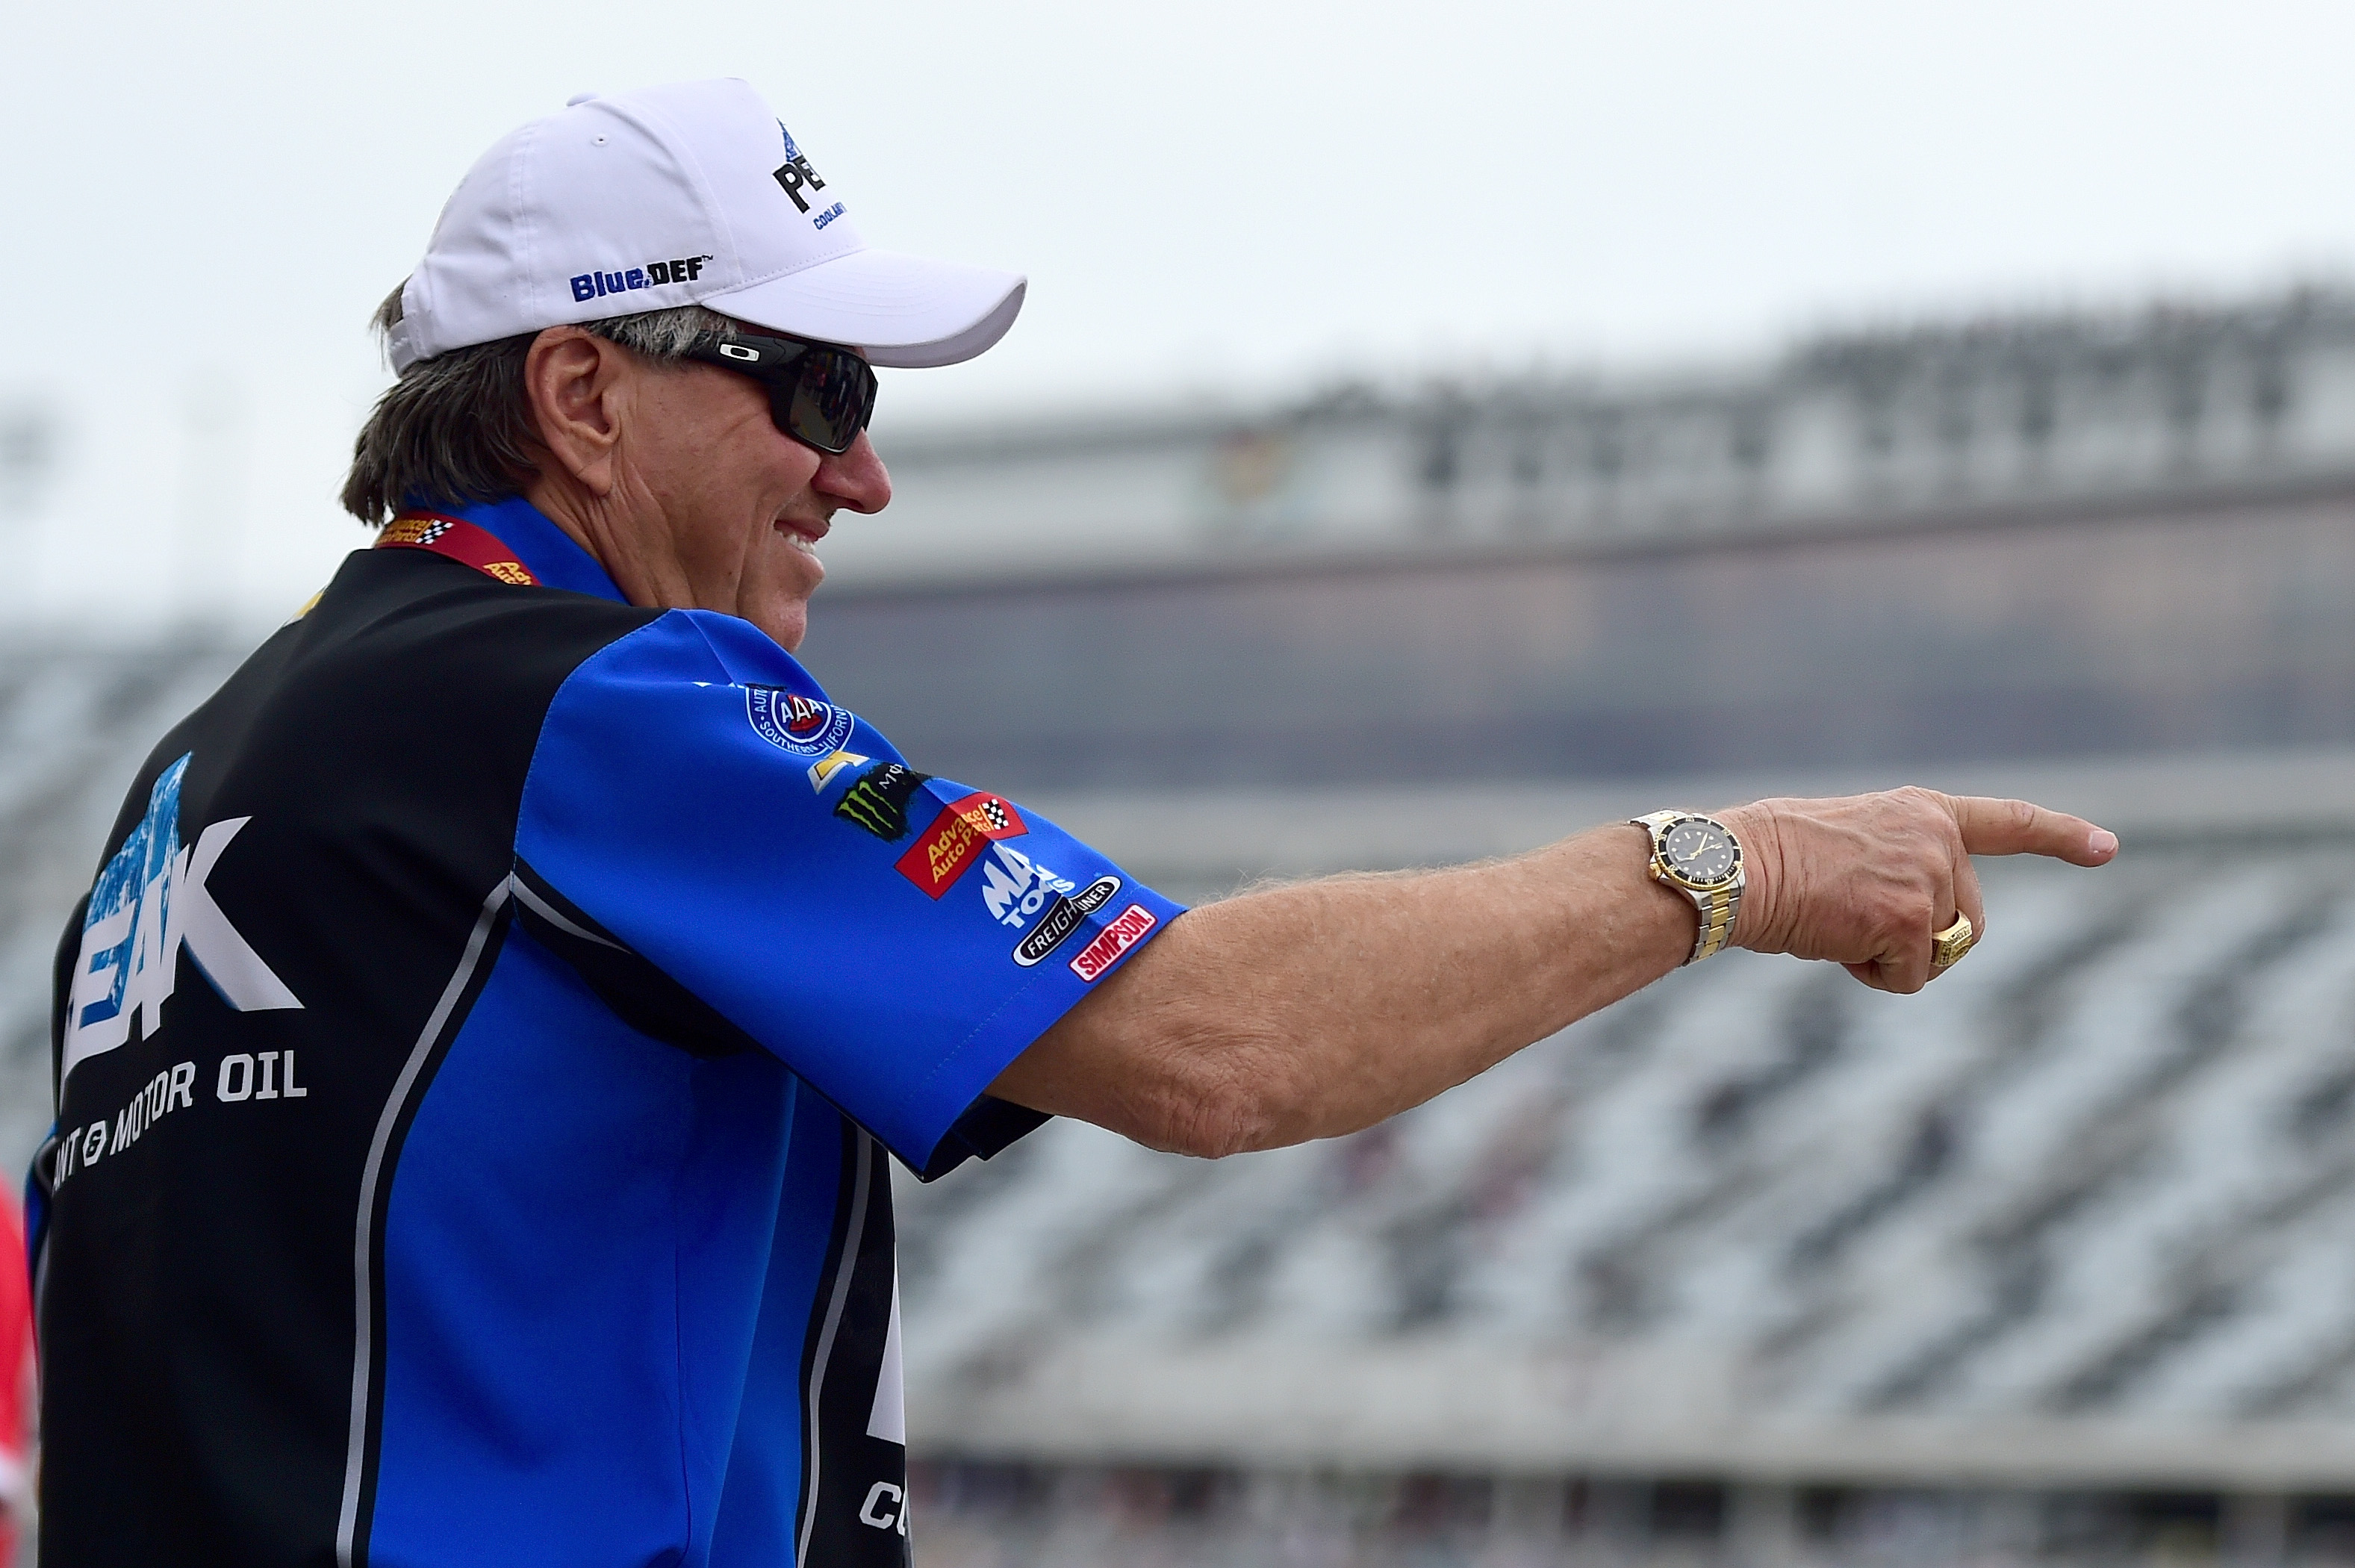 John Force in intensive care after life-threatening accident during a drag race – 500 km/h